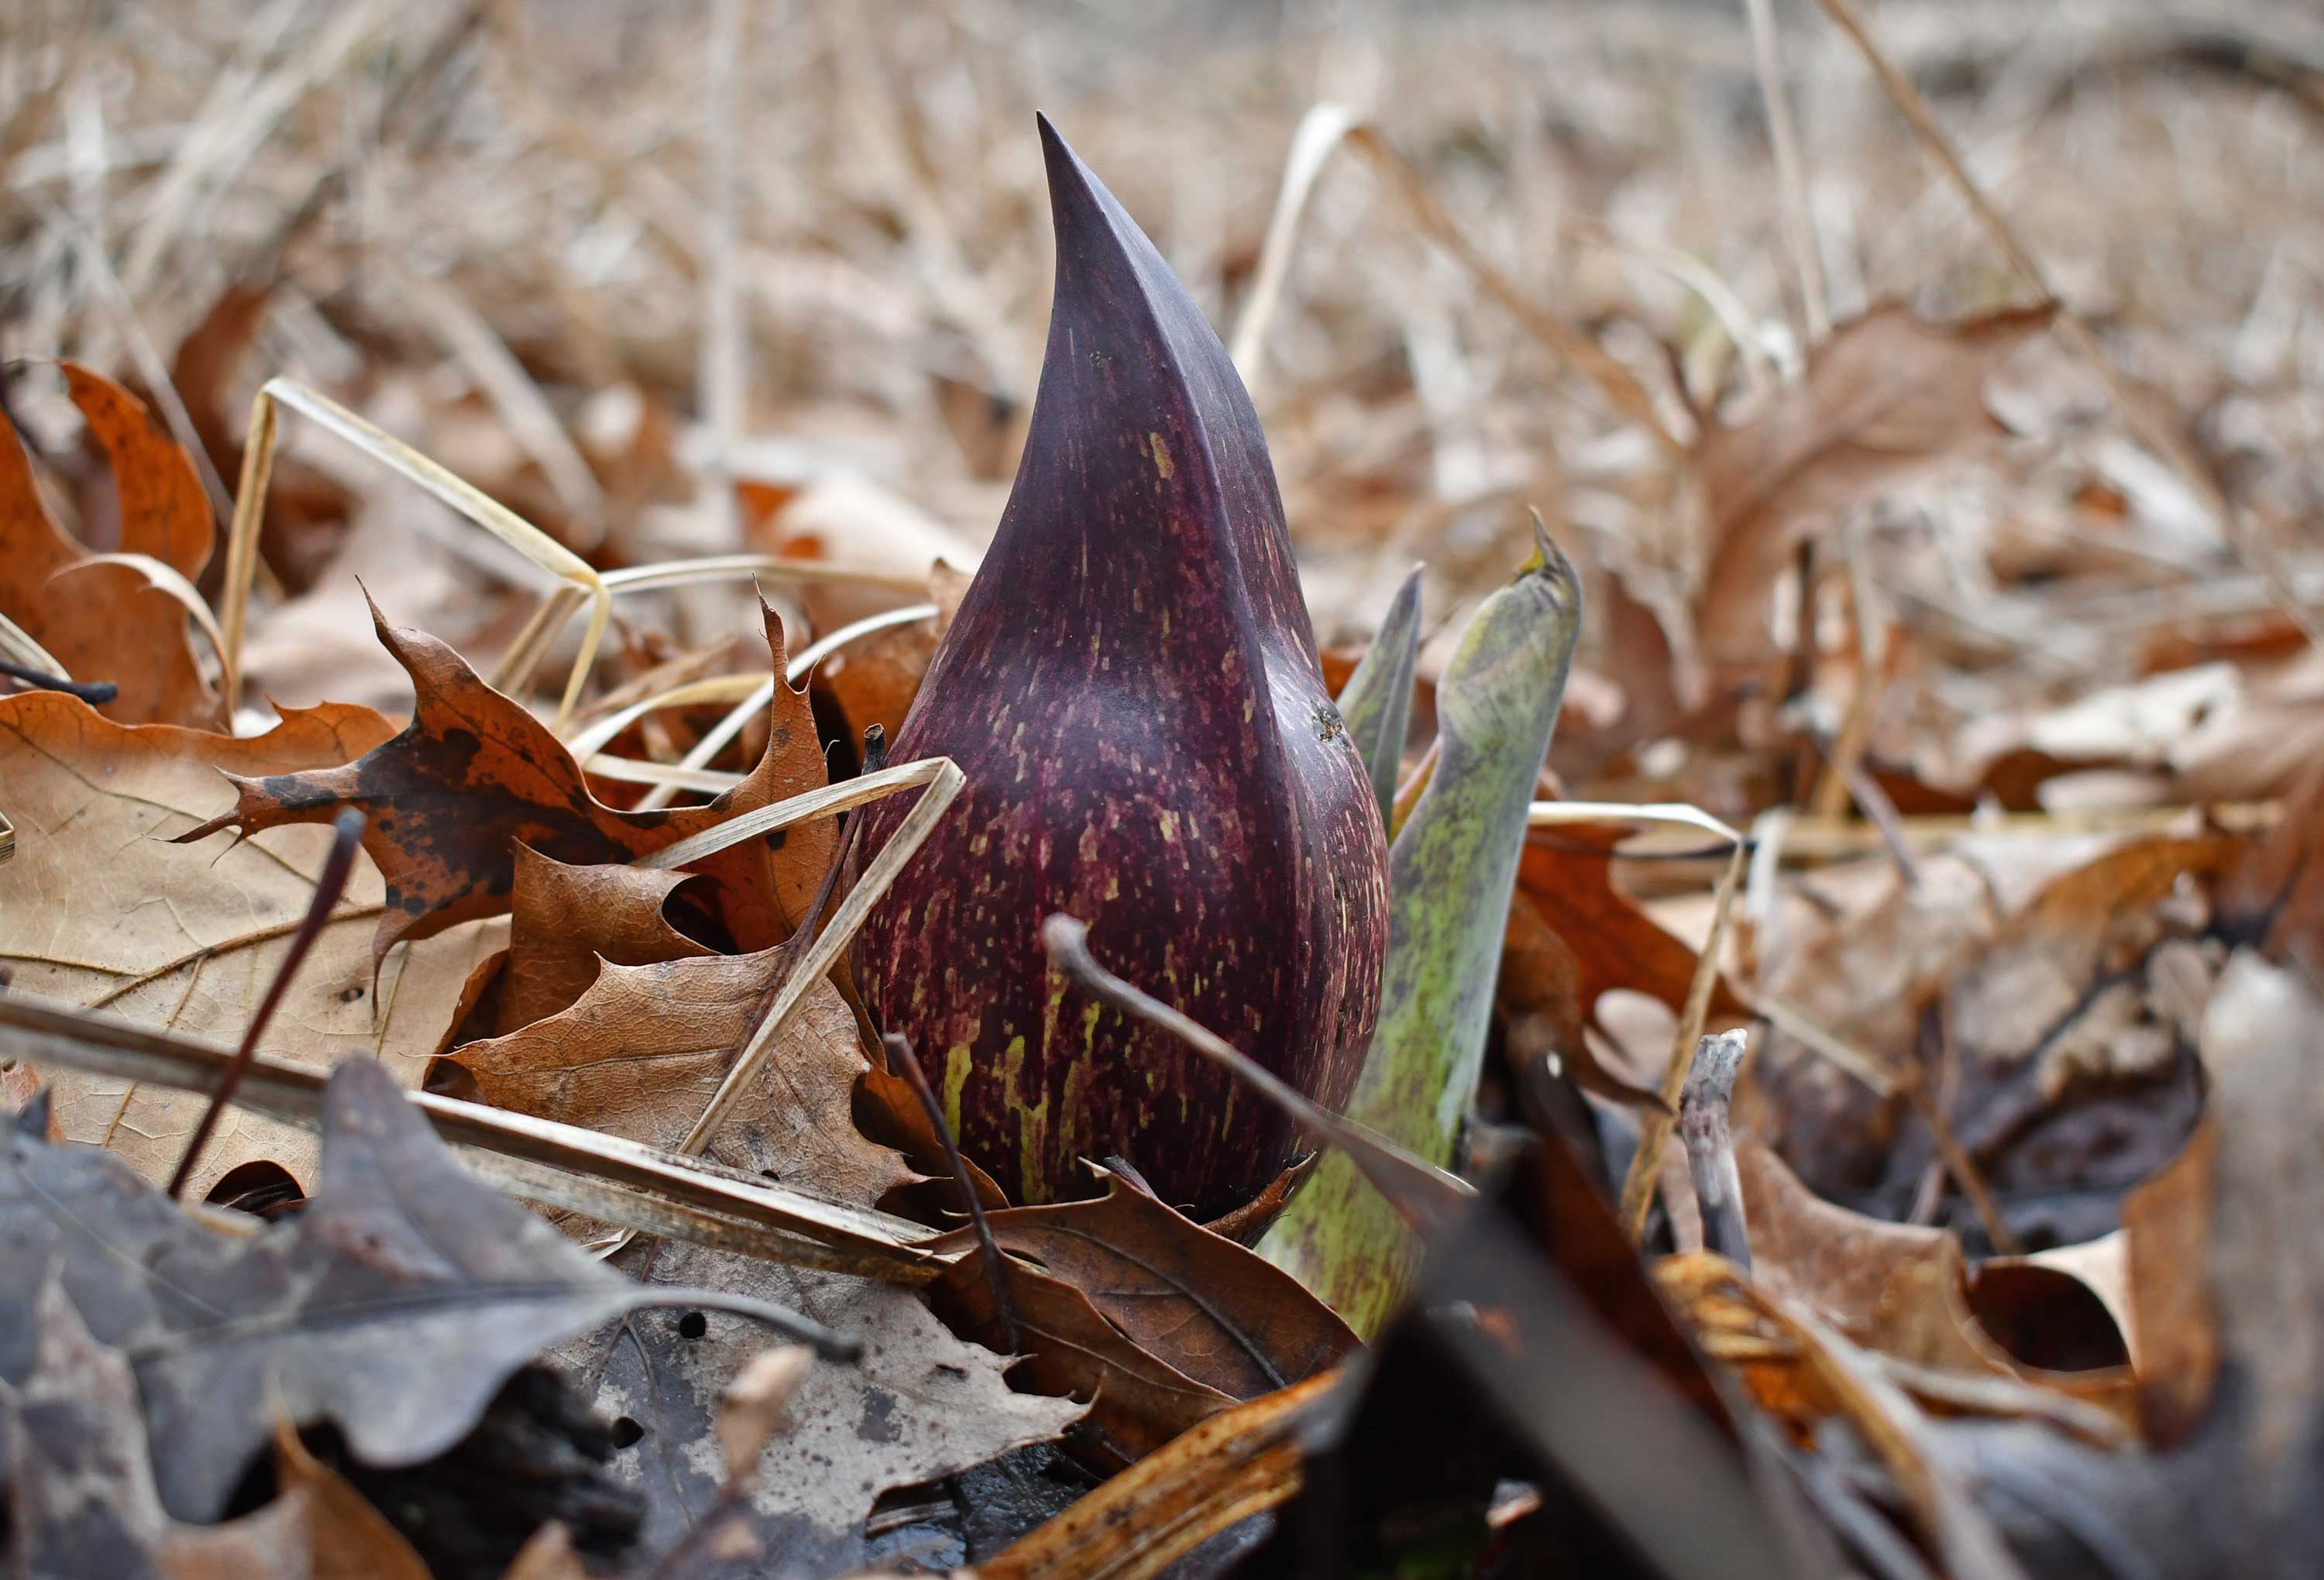 The maroon colored leaves of skunk cabbage on the forest floor.